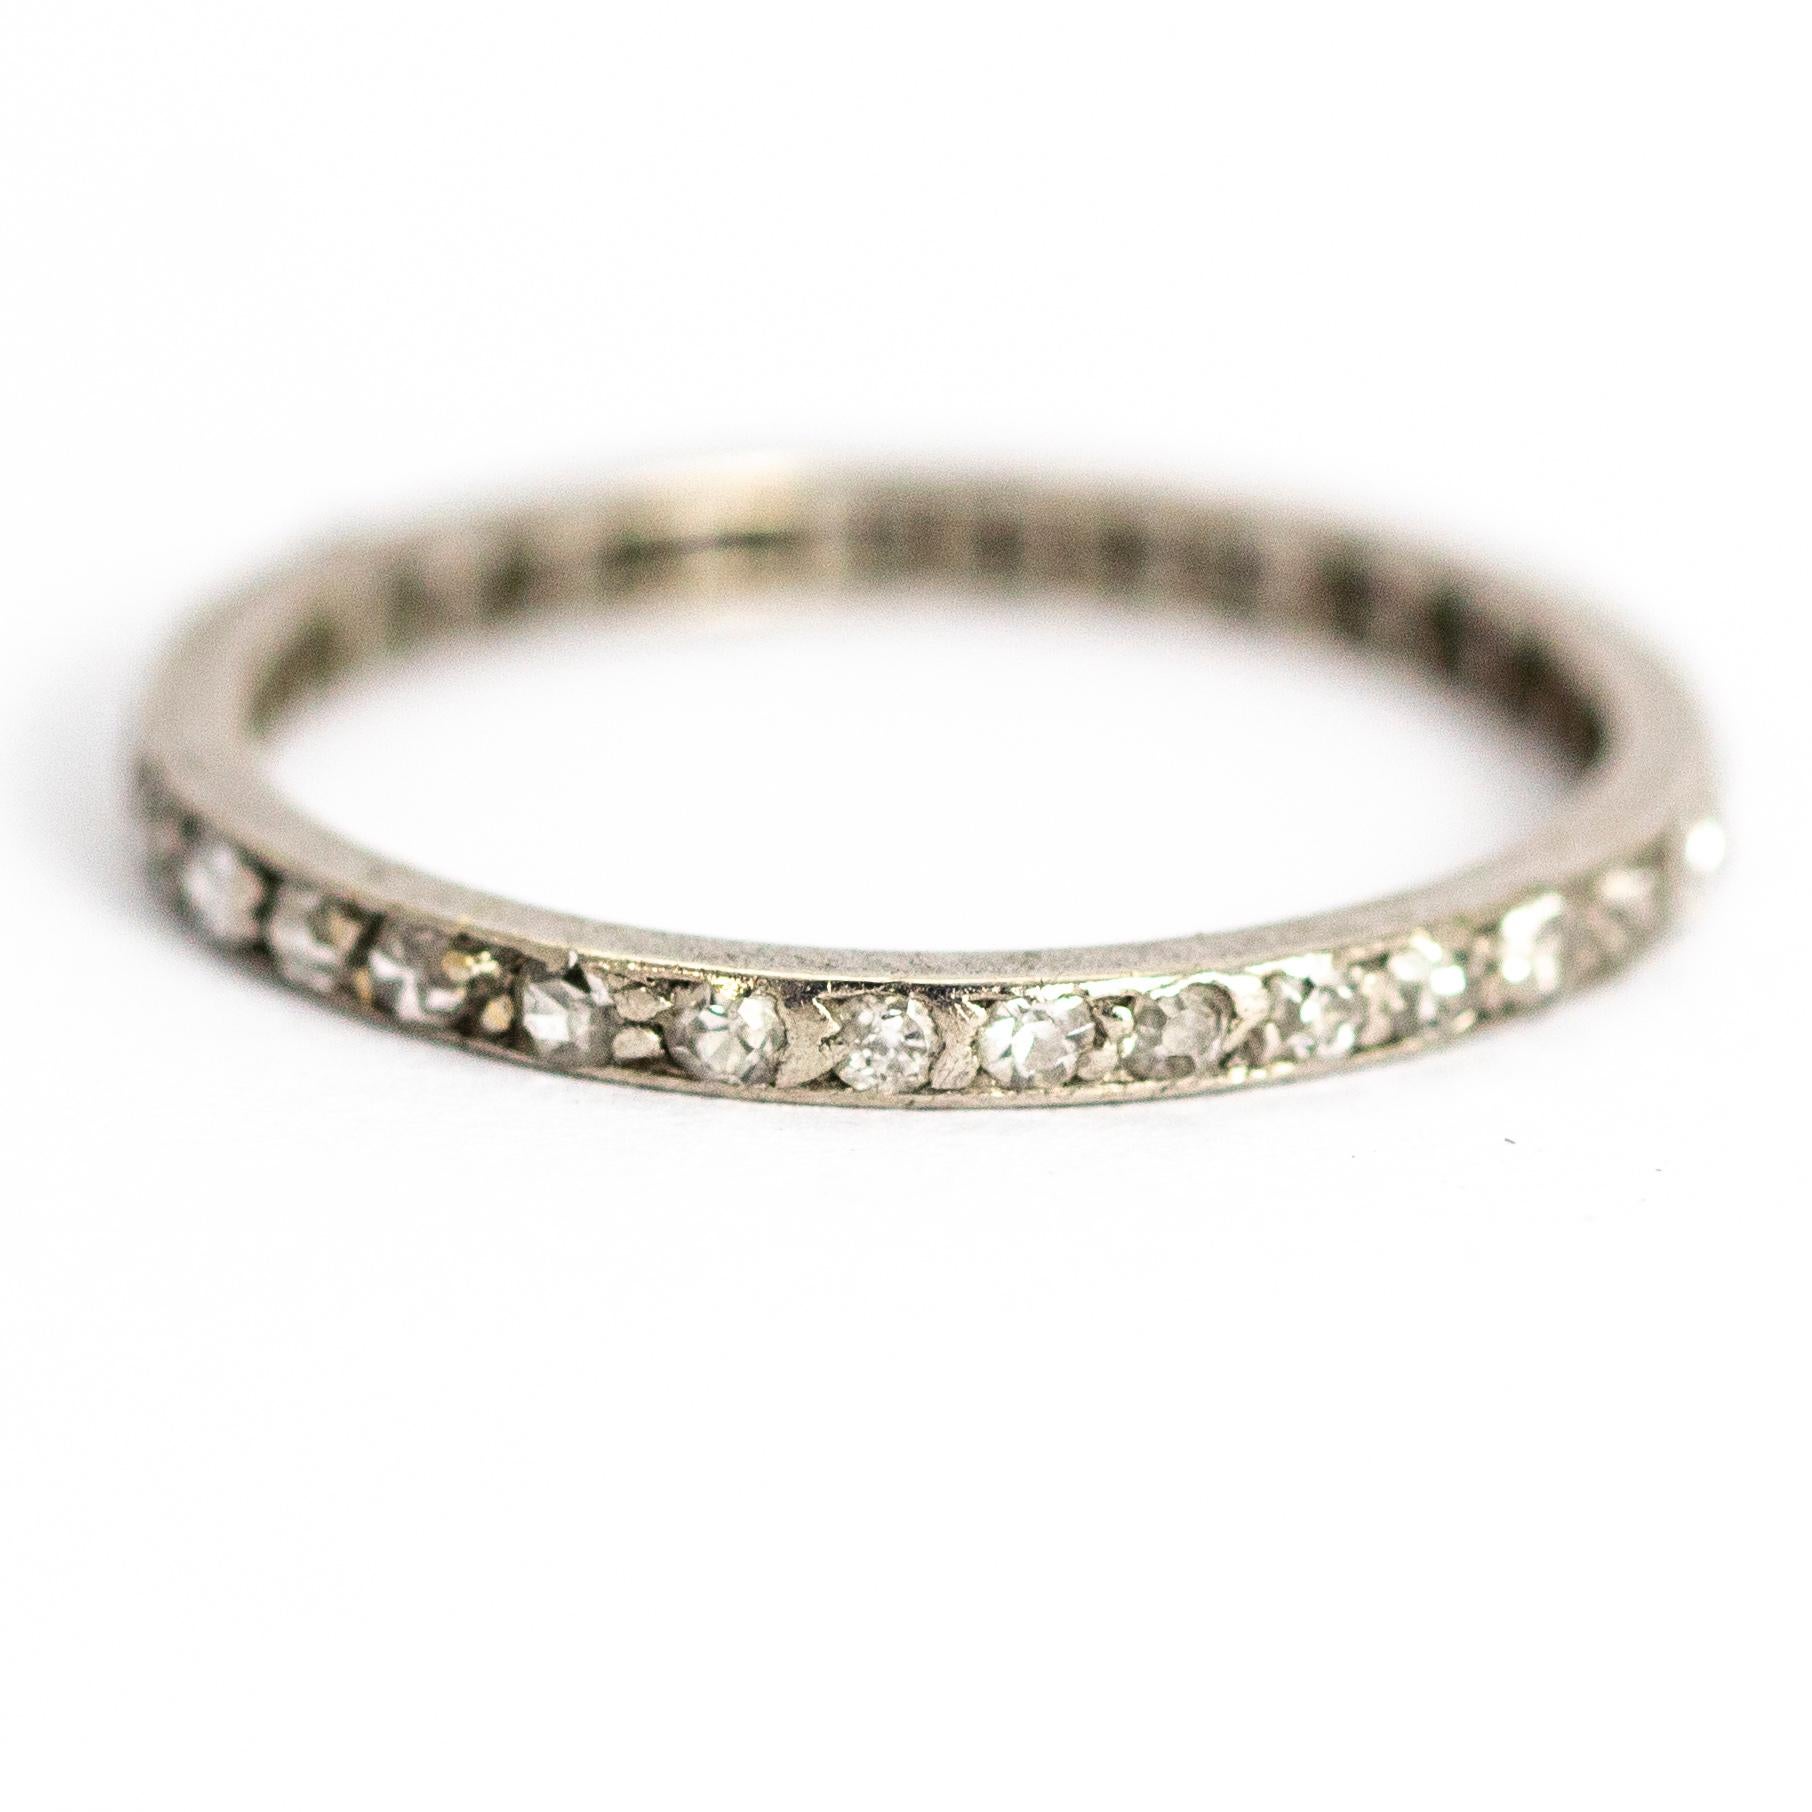 A beautiful eternity band dating from the Art Deco period circa 1915. The ring is fully set with stunning old European cut white diamonds. Modelled in platinum.

Ring Size: UK M 1/2, US 6 3/4

Band Width: 1.74mm

Band Depth: 1.51mm